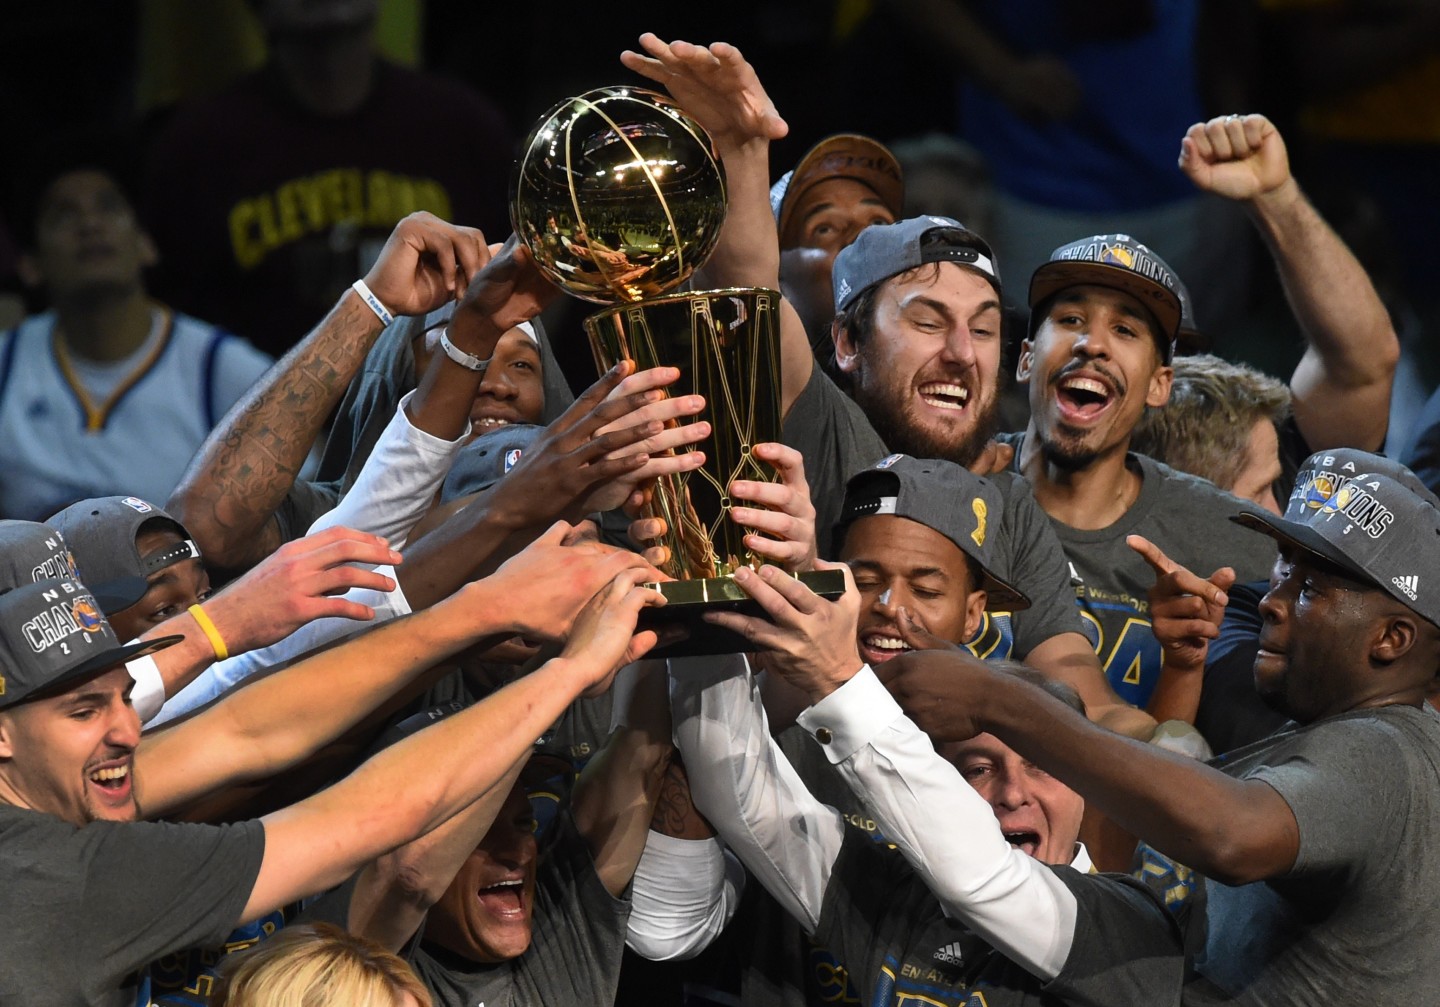 The Golden State Warriors celebrate winning the 2015 NBA Finals on June 16, 2015 at the Quicken Loans Arena in Cleveland, Ohio.   (Timothy A. Clary/AFP/Getty)